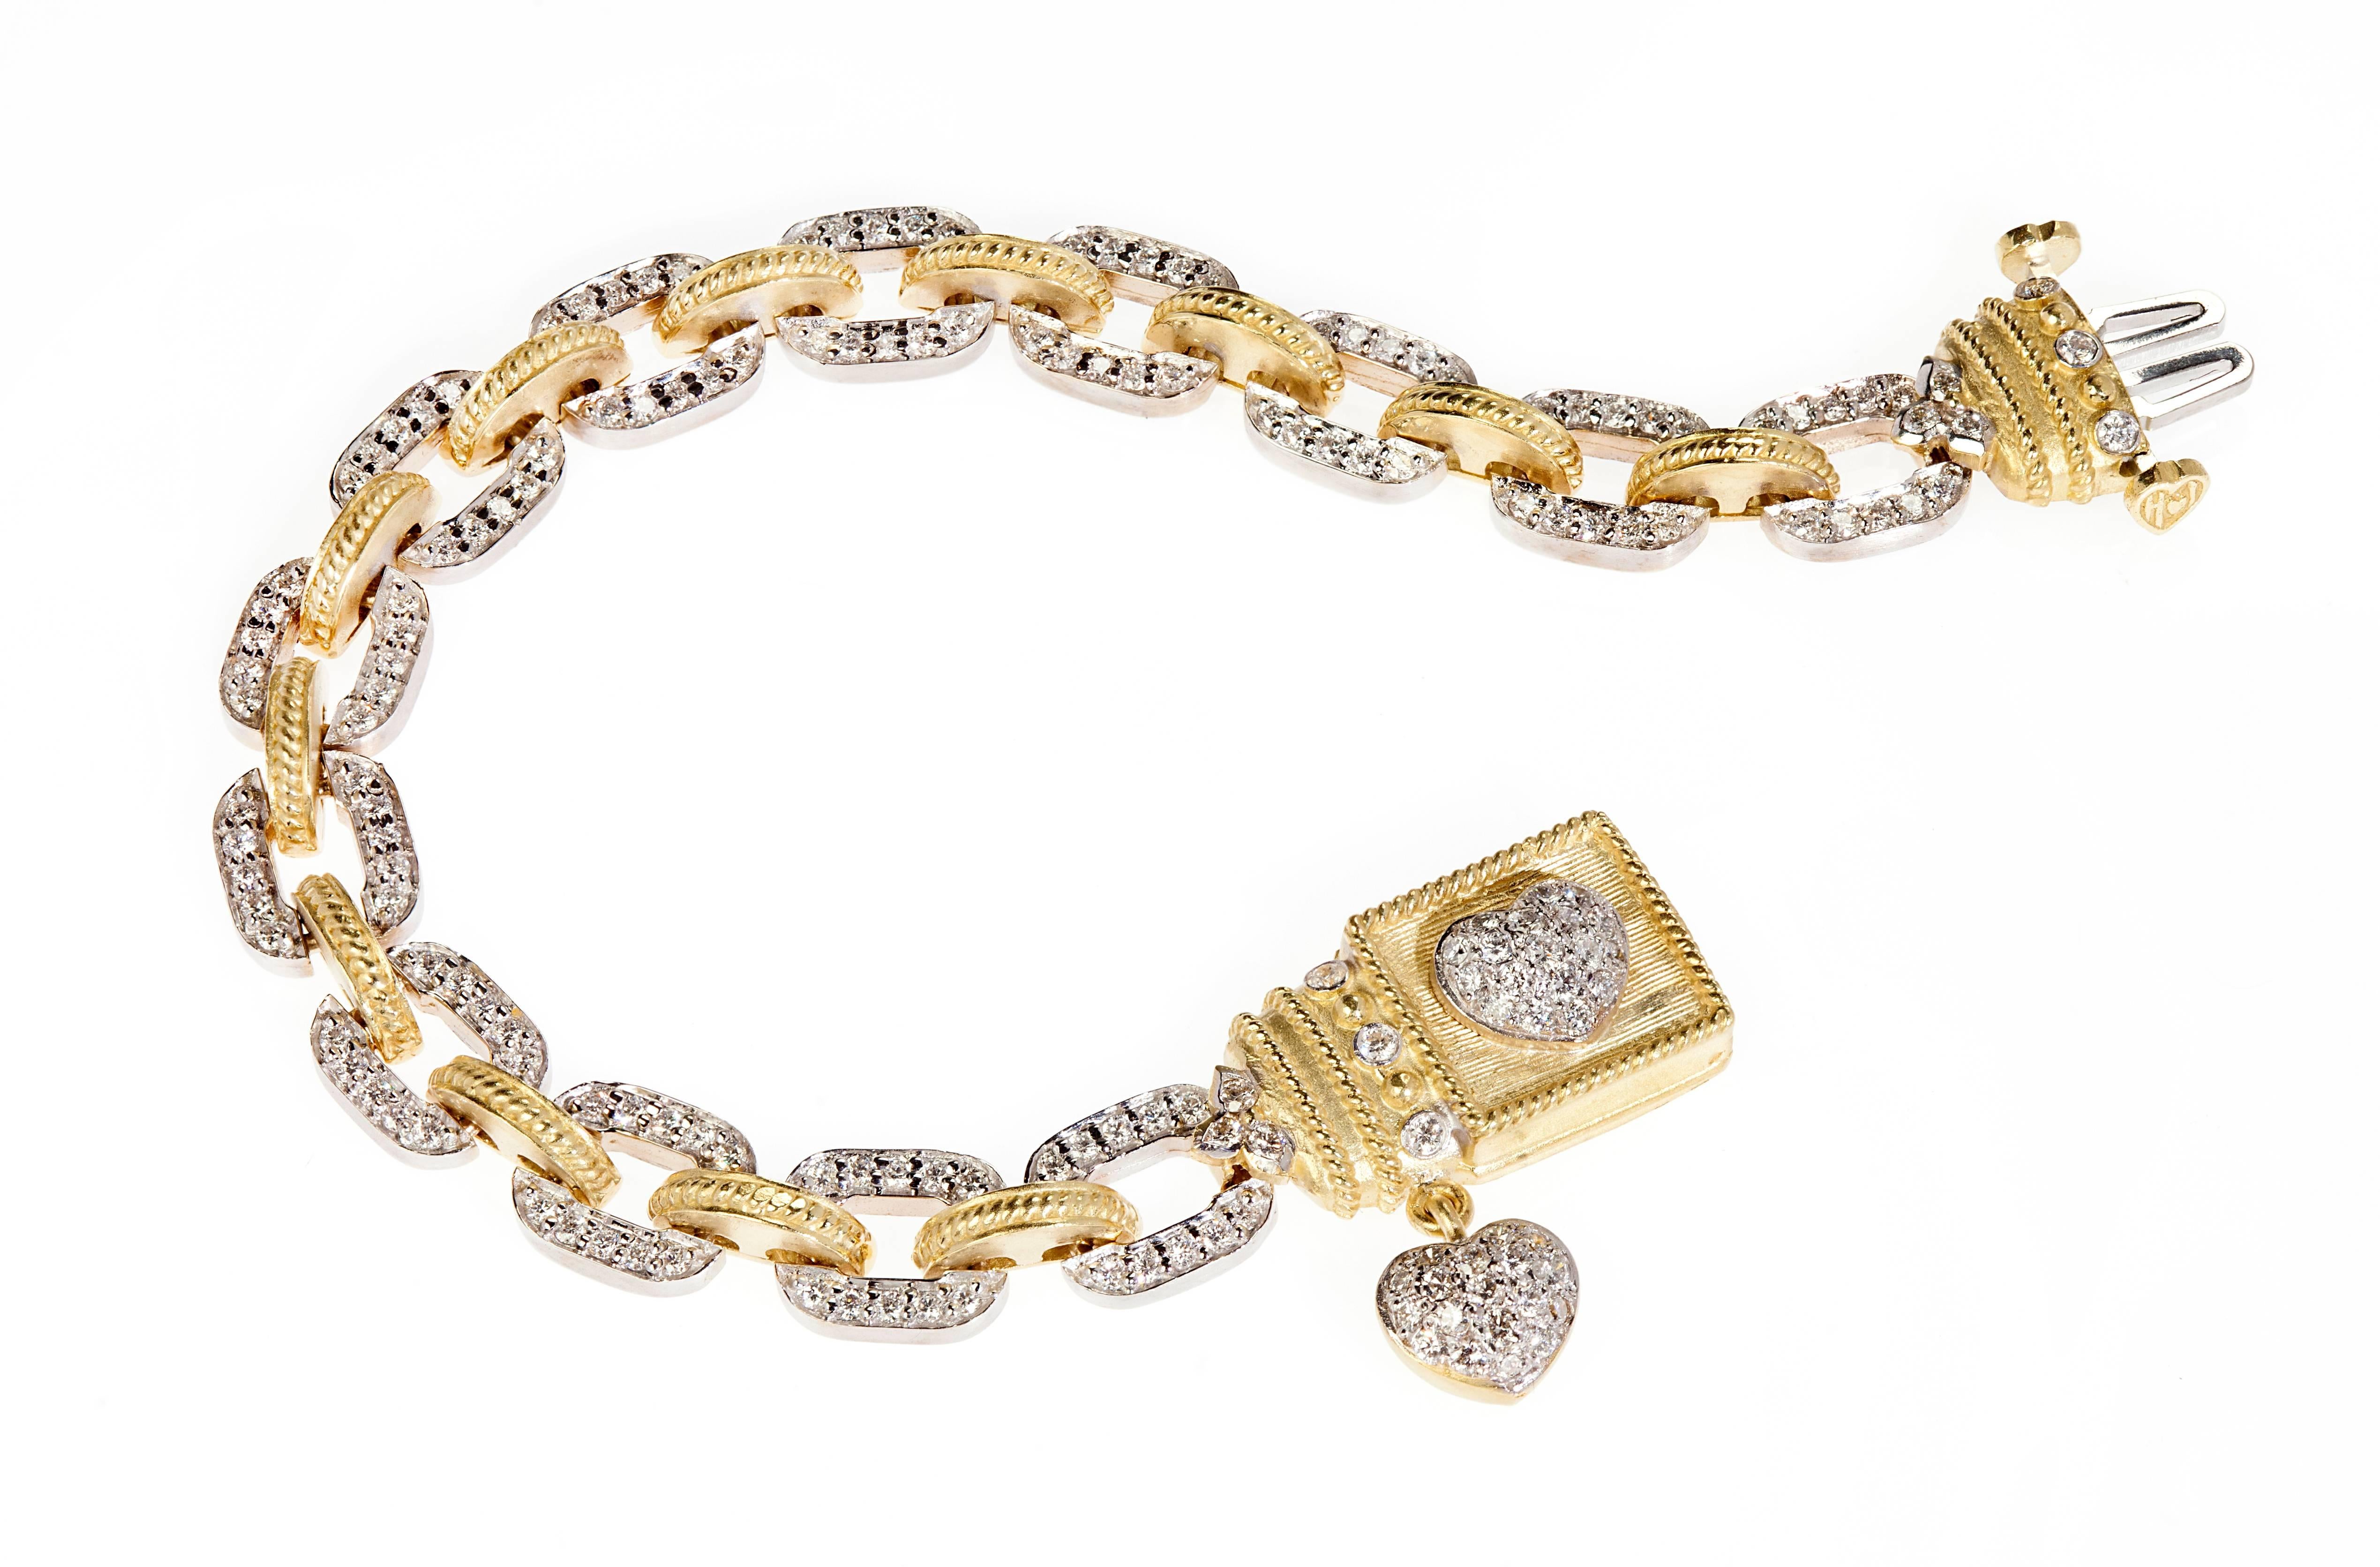 18K Two-Tone Gold Link Bracelet with Diamonds and Dangling Heart by Stambolian

Bracelet links are alternating white and yellow gold. The white gold links have diamonds set on one side.

2.30ct. apprx. G Color, VS Clarity Diamonds

7 inches